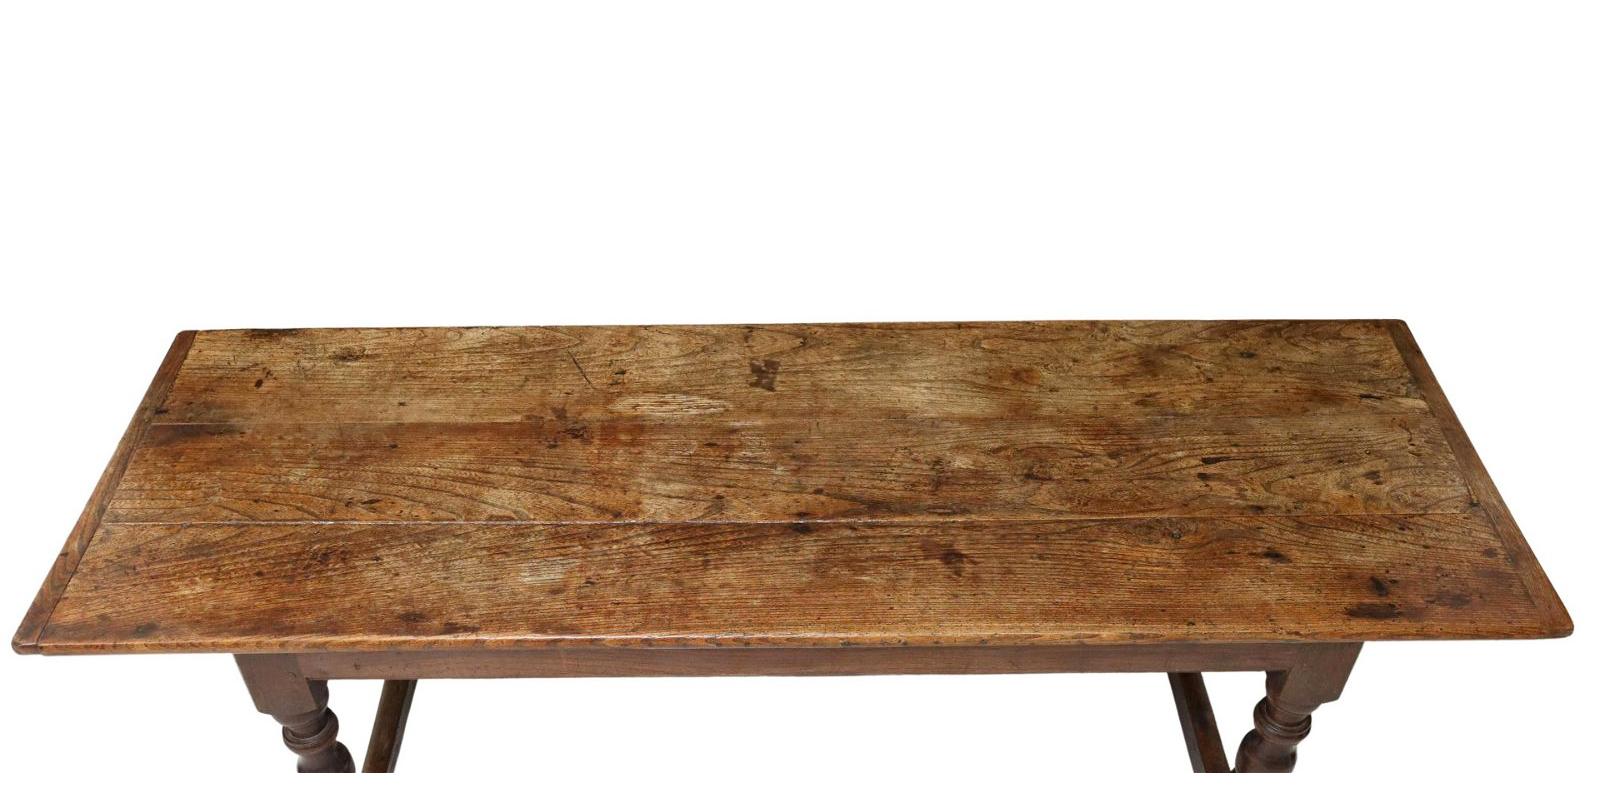 Hand-Crafted Antique English Oak Three-Plank Refectory Table, 18th C